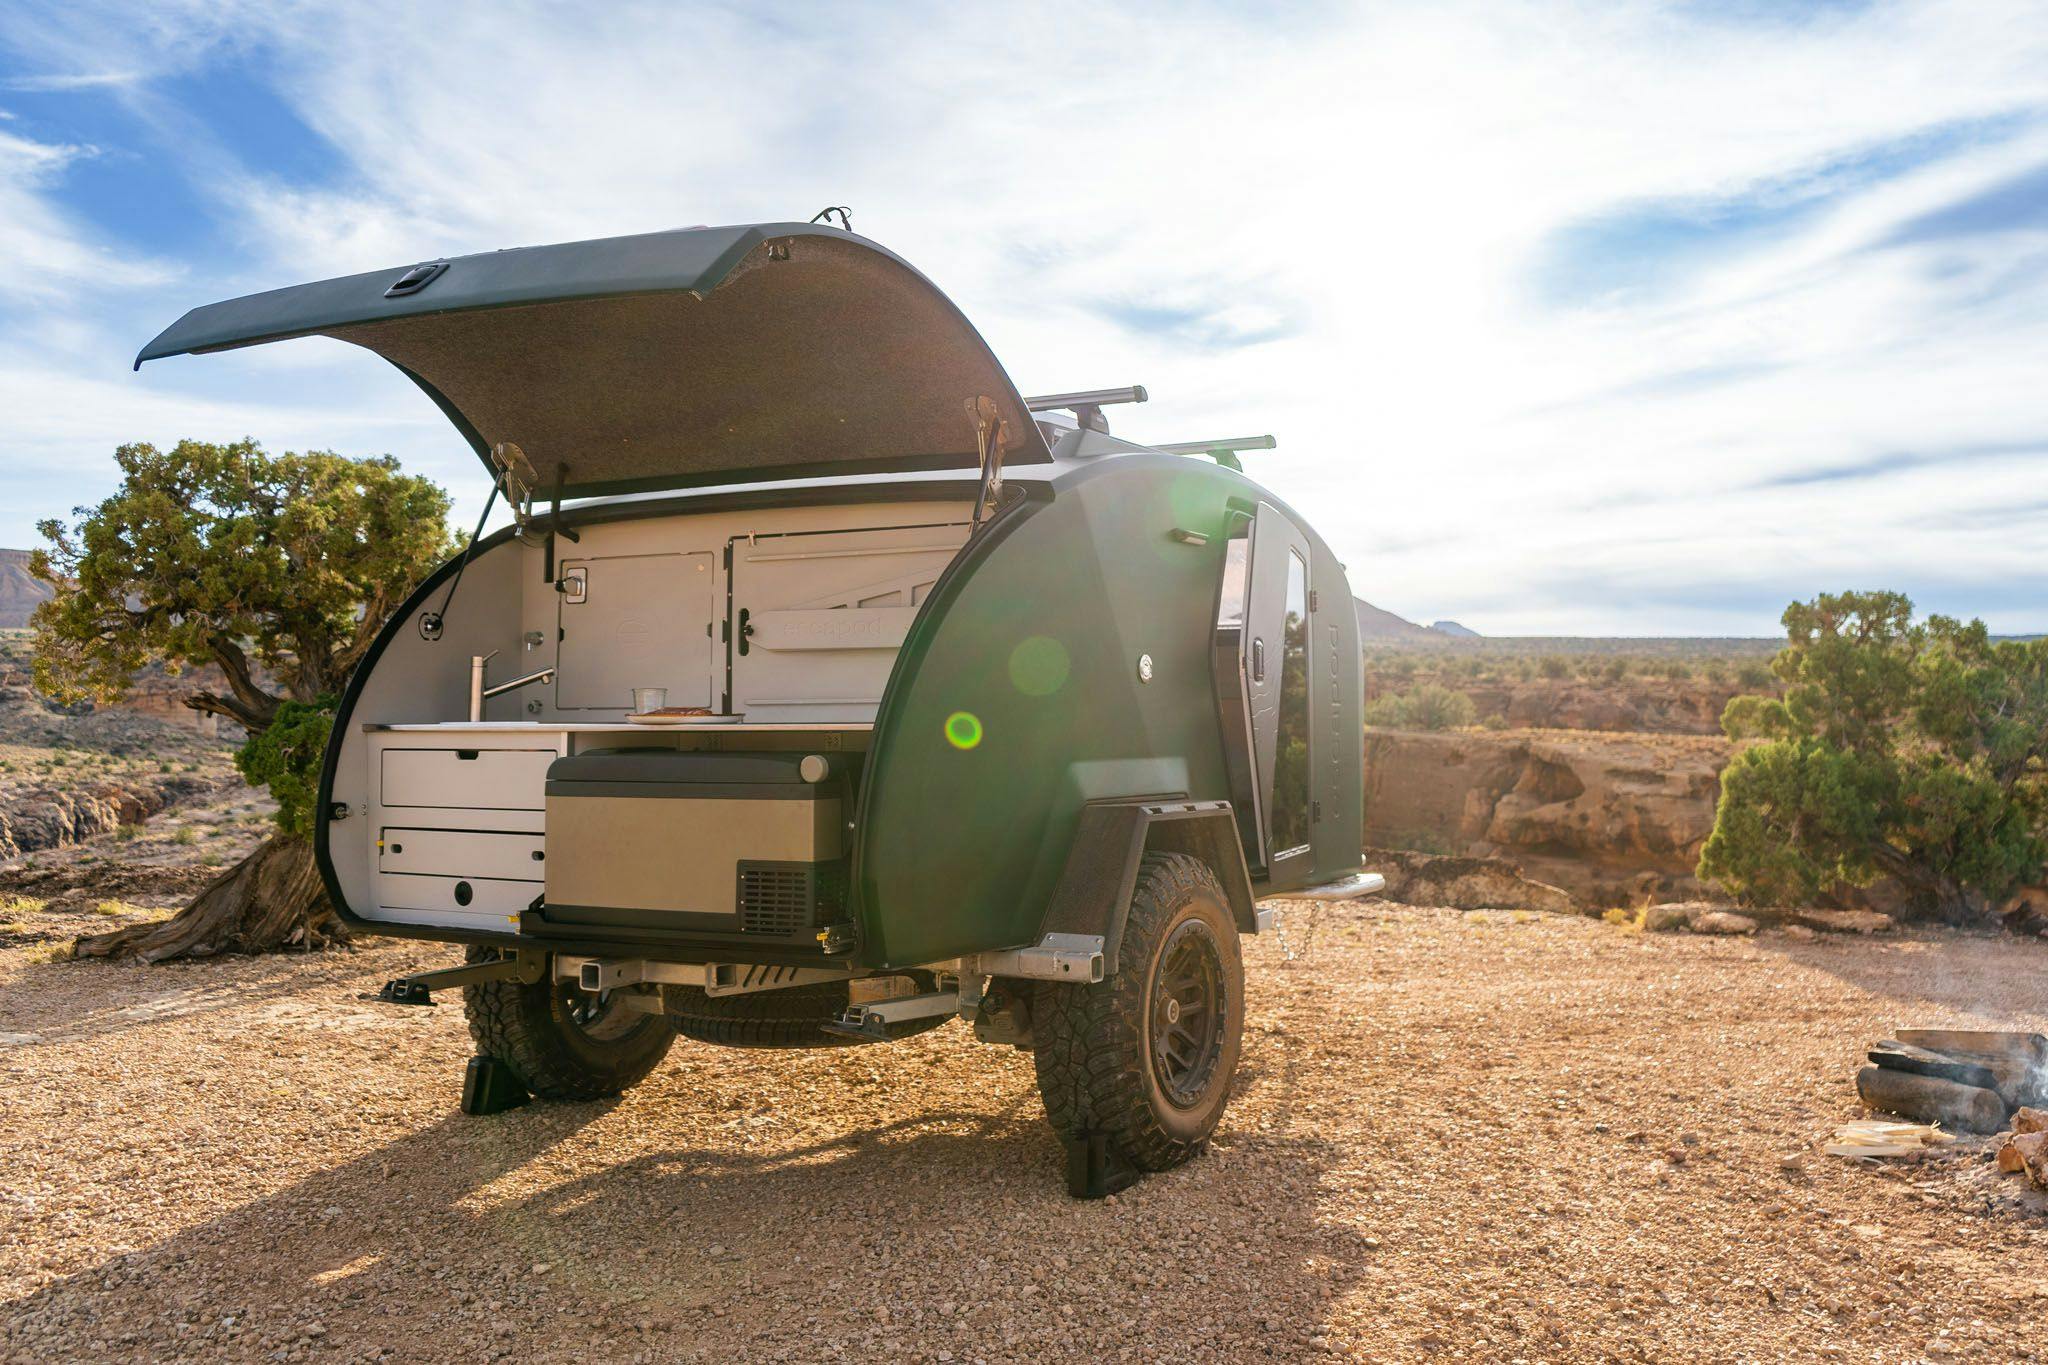 TOPO2, a premium teardrop camper parked with the camp kitchen exposed and ready to cook.